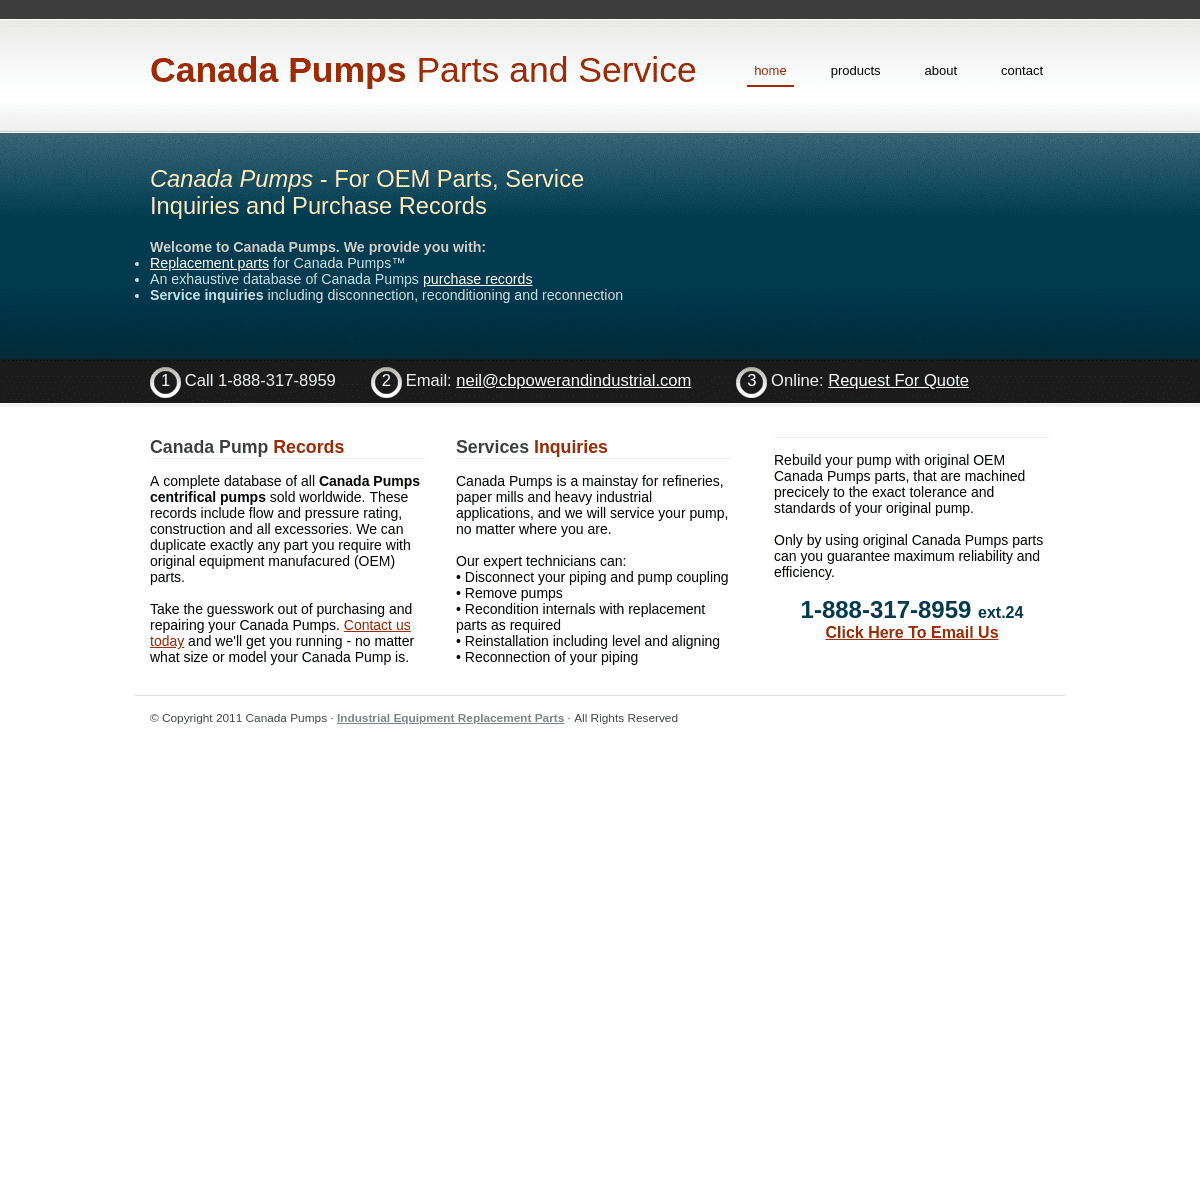 A complete backup of canadapumps.com